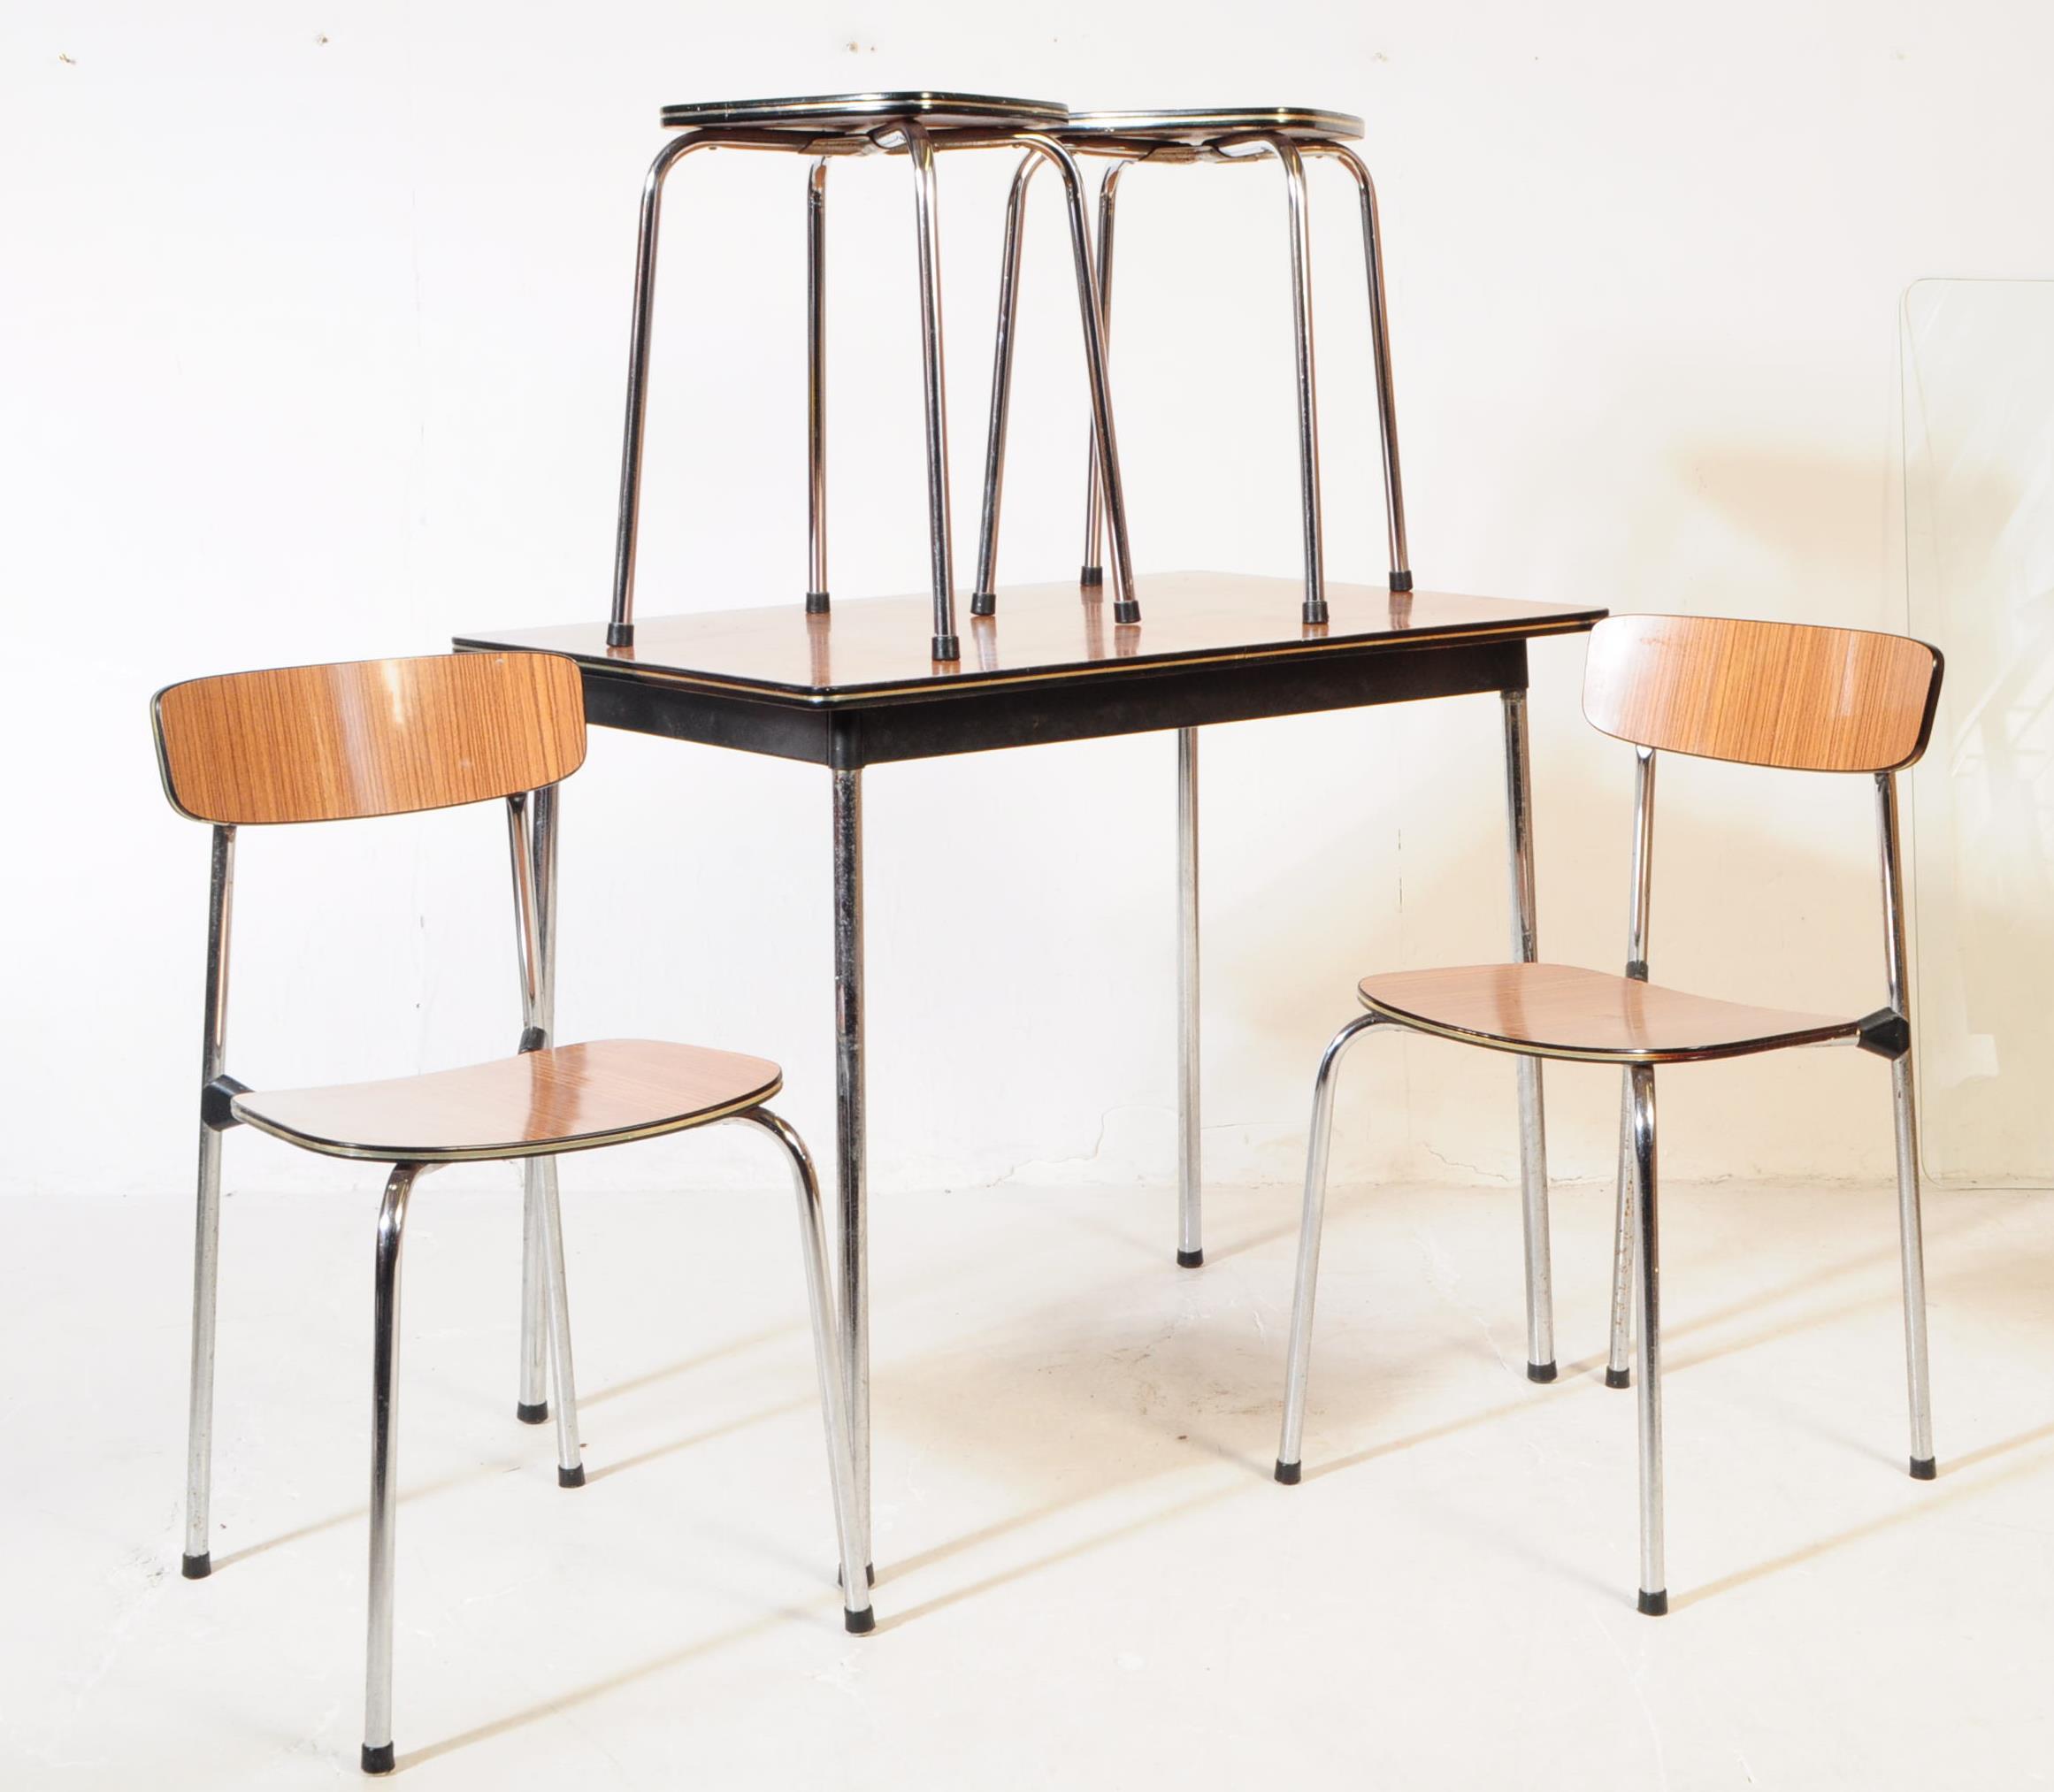 BRITISH MODERN DESIGN - FORMICA KITCHEN TABLE - CHAIRS - STOOLS